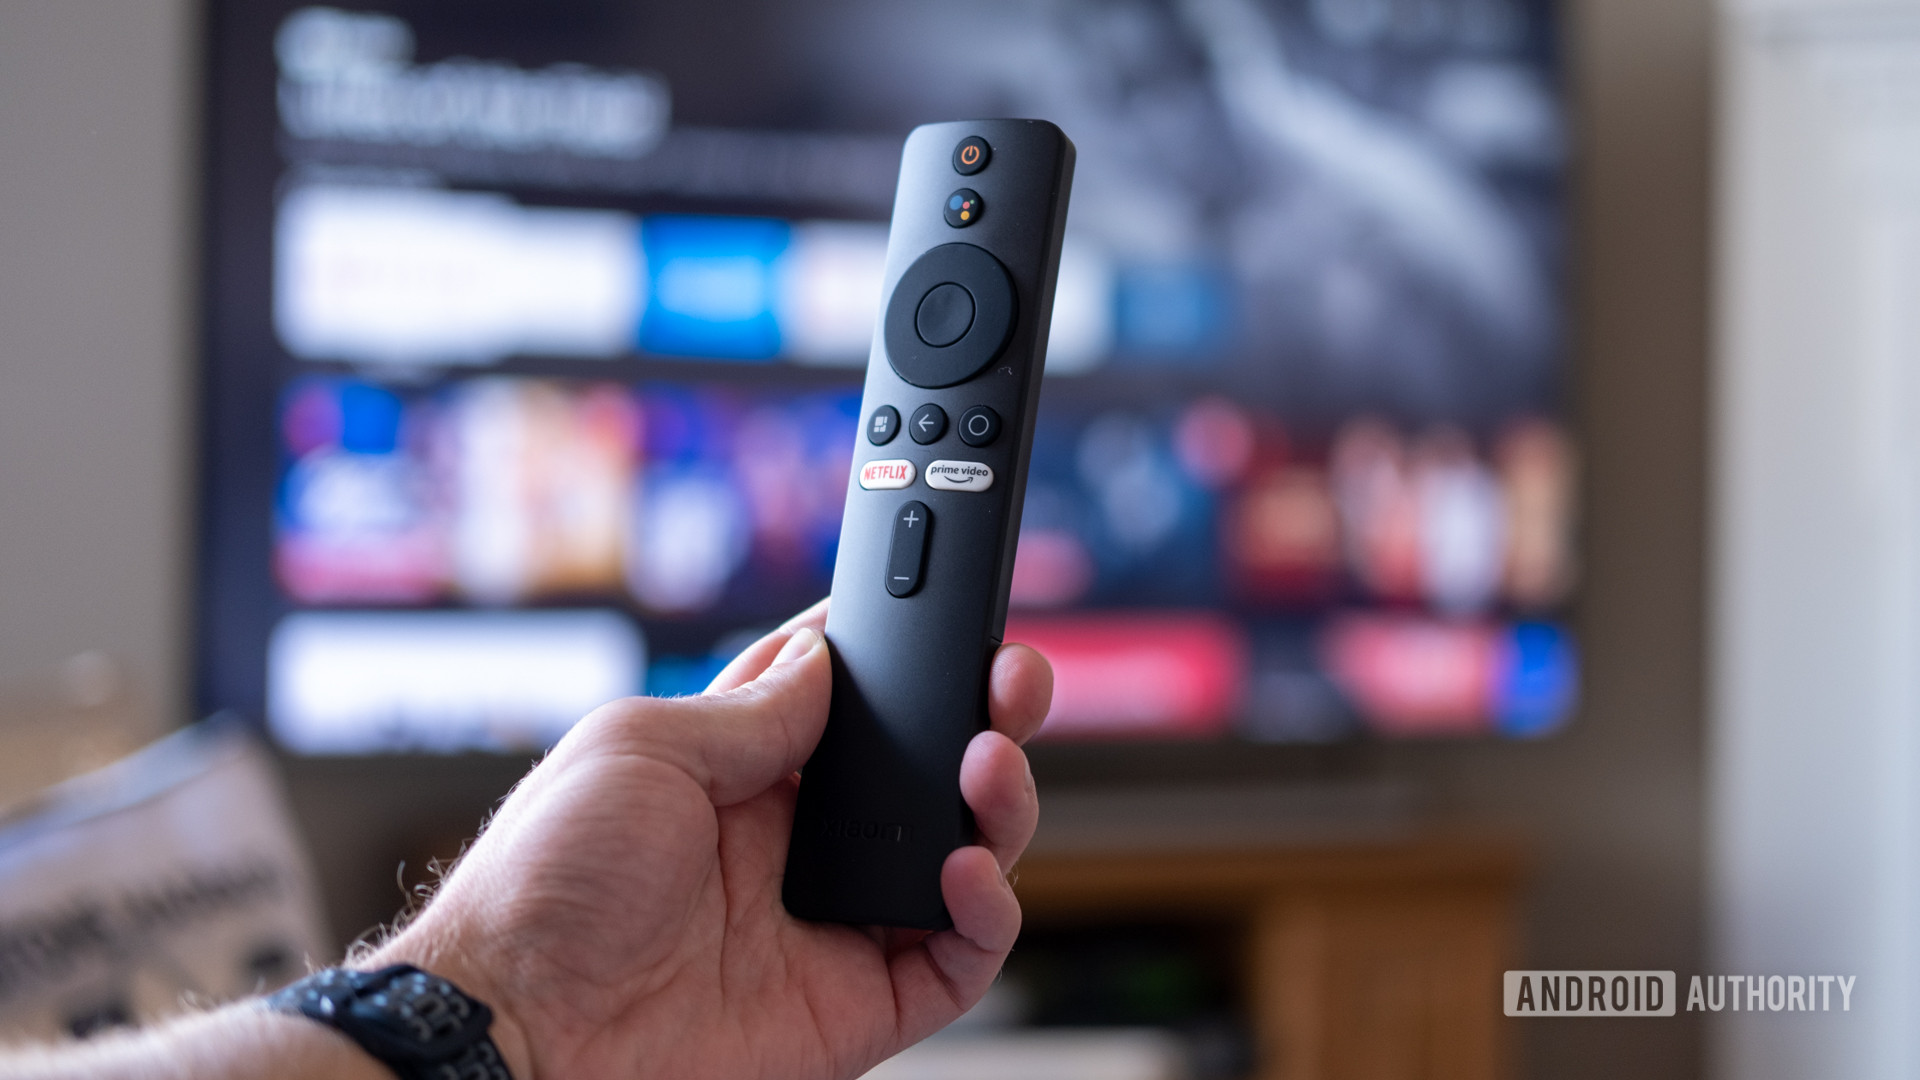 Xiaomi TV Stick remote in hand, in front of TV.